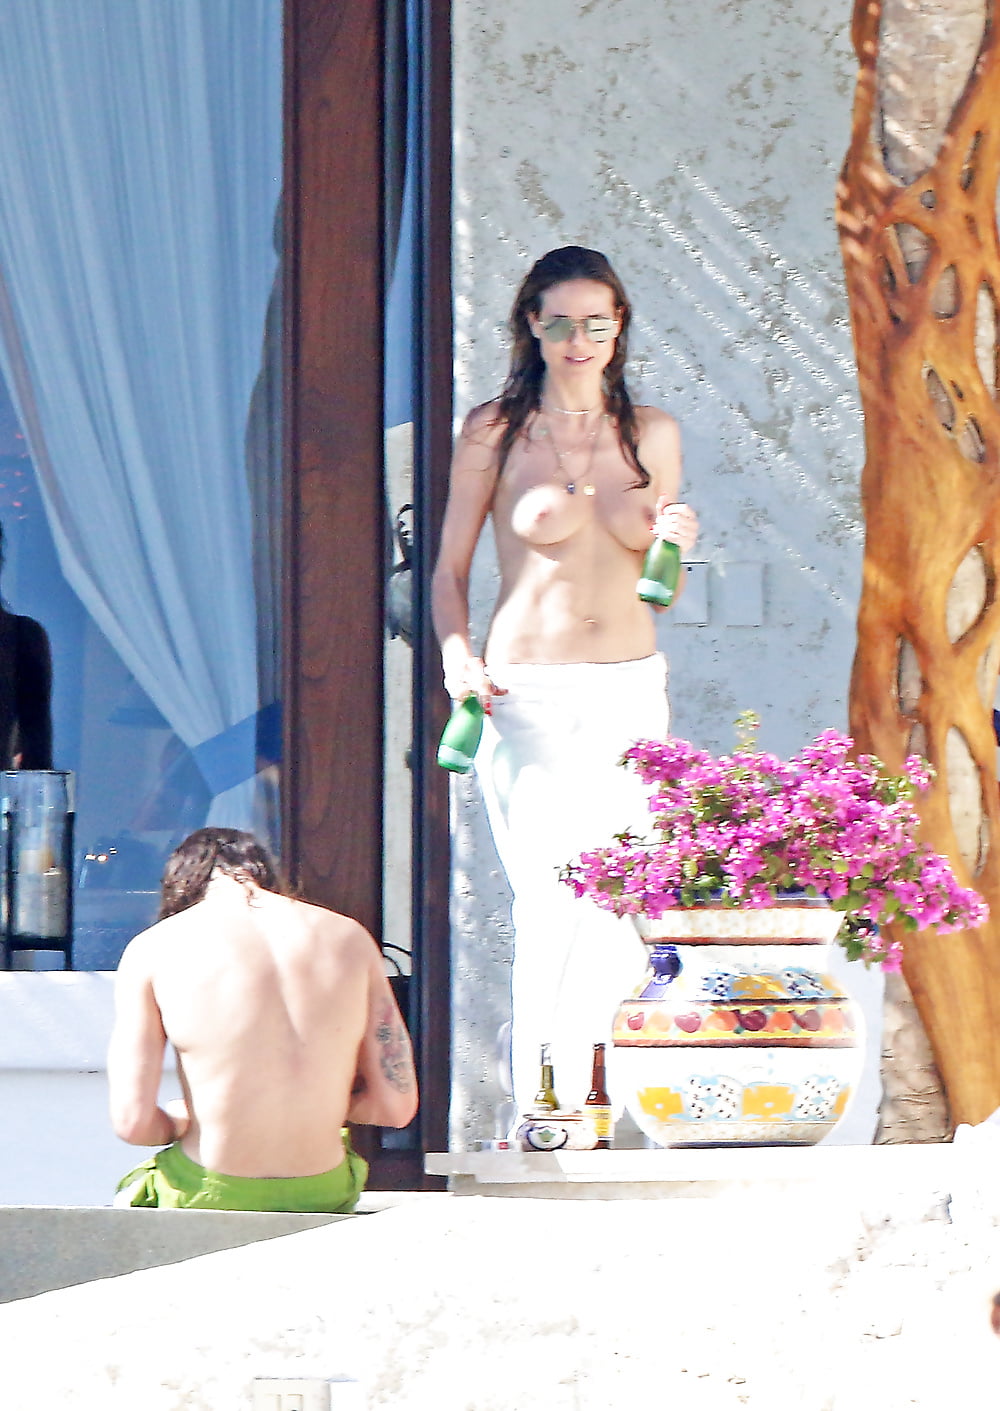 HEIDI_KLUM___TOPLESS_WITH_HER_NEW_LOVER_IN_CABO_SAN_LUCAS (9/11)